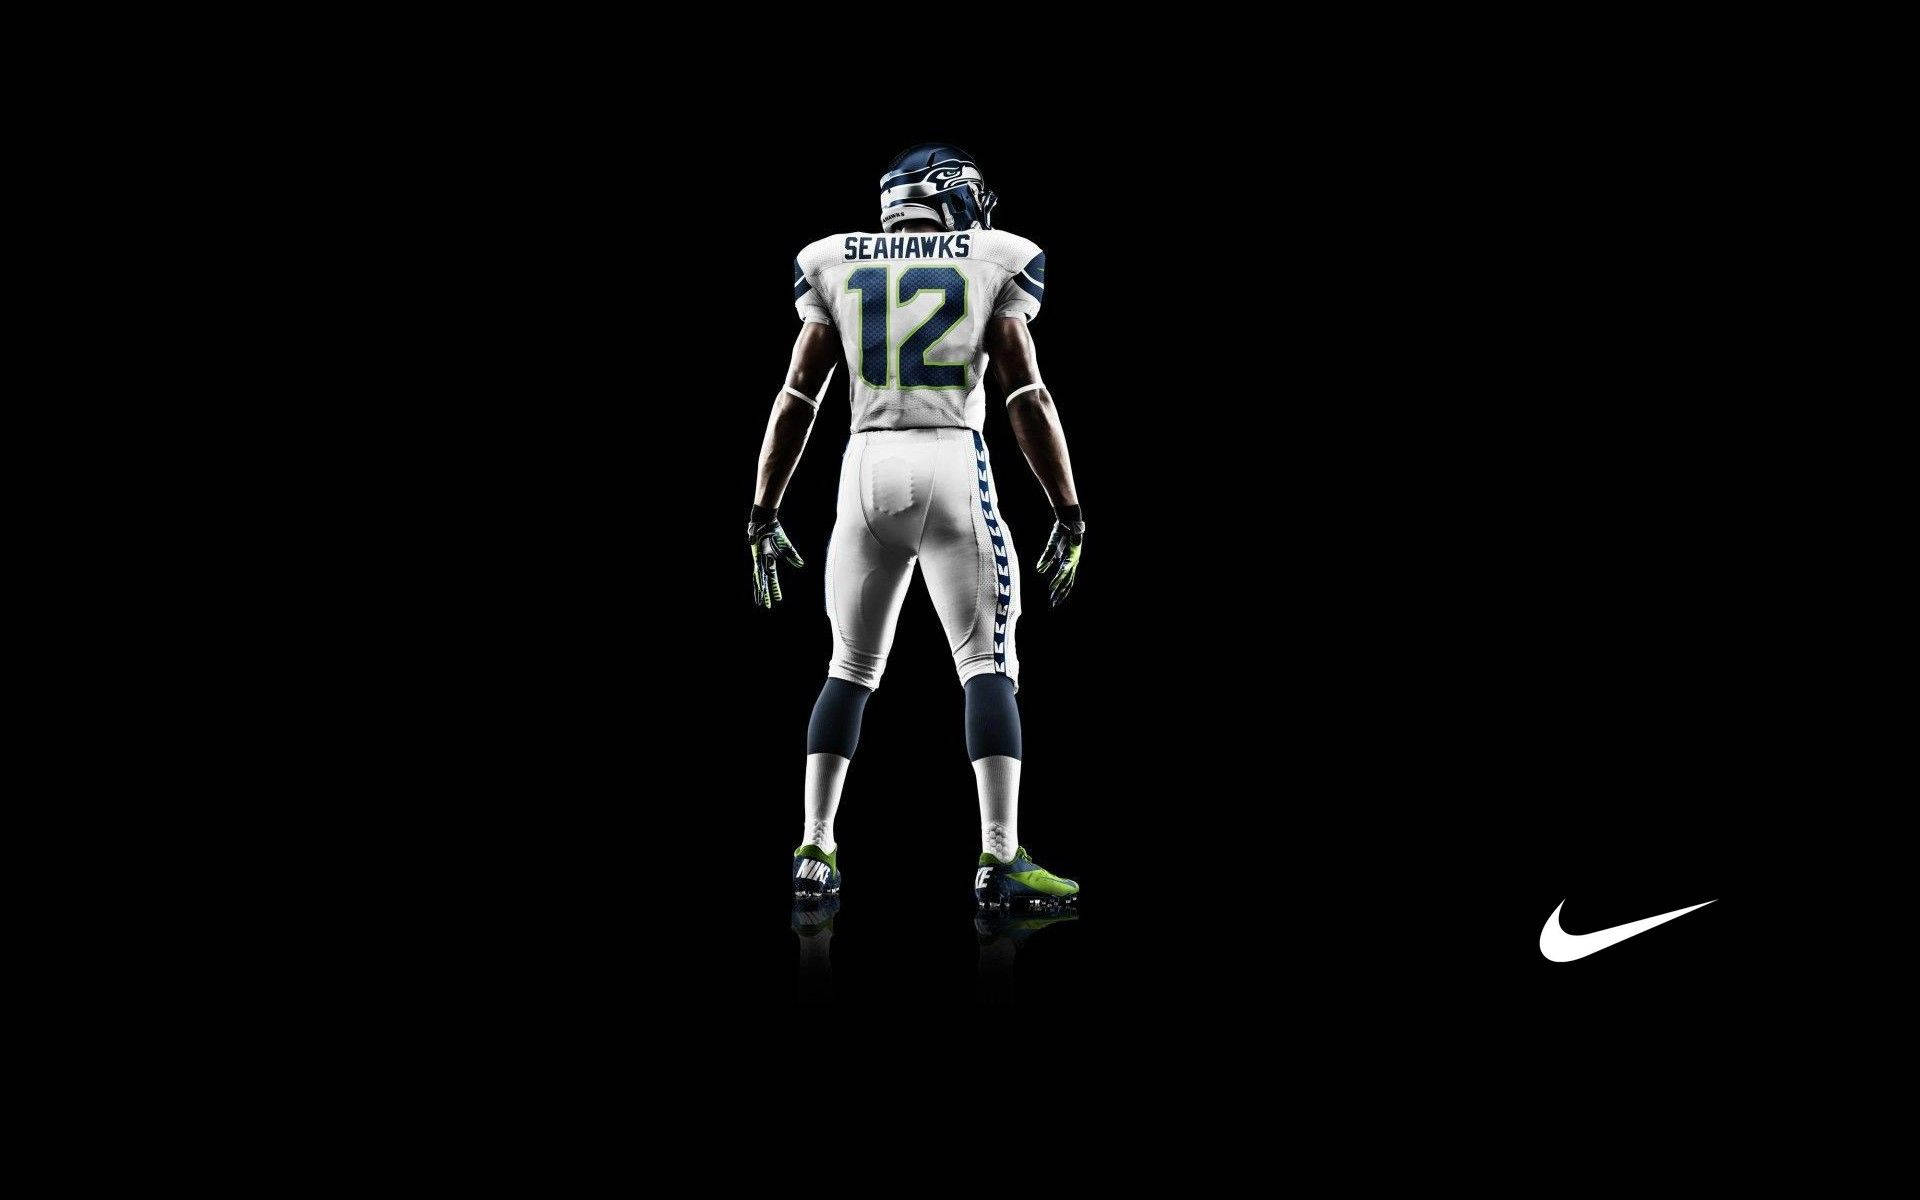 Seattle Seahawks Player In Black Background